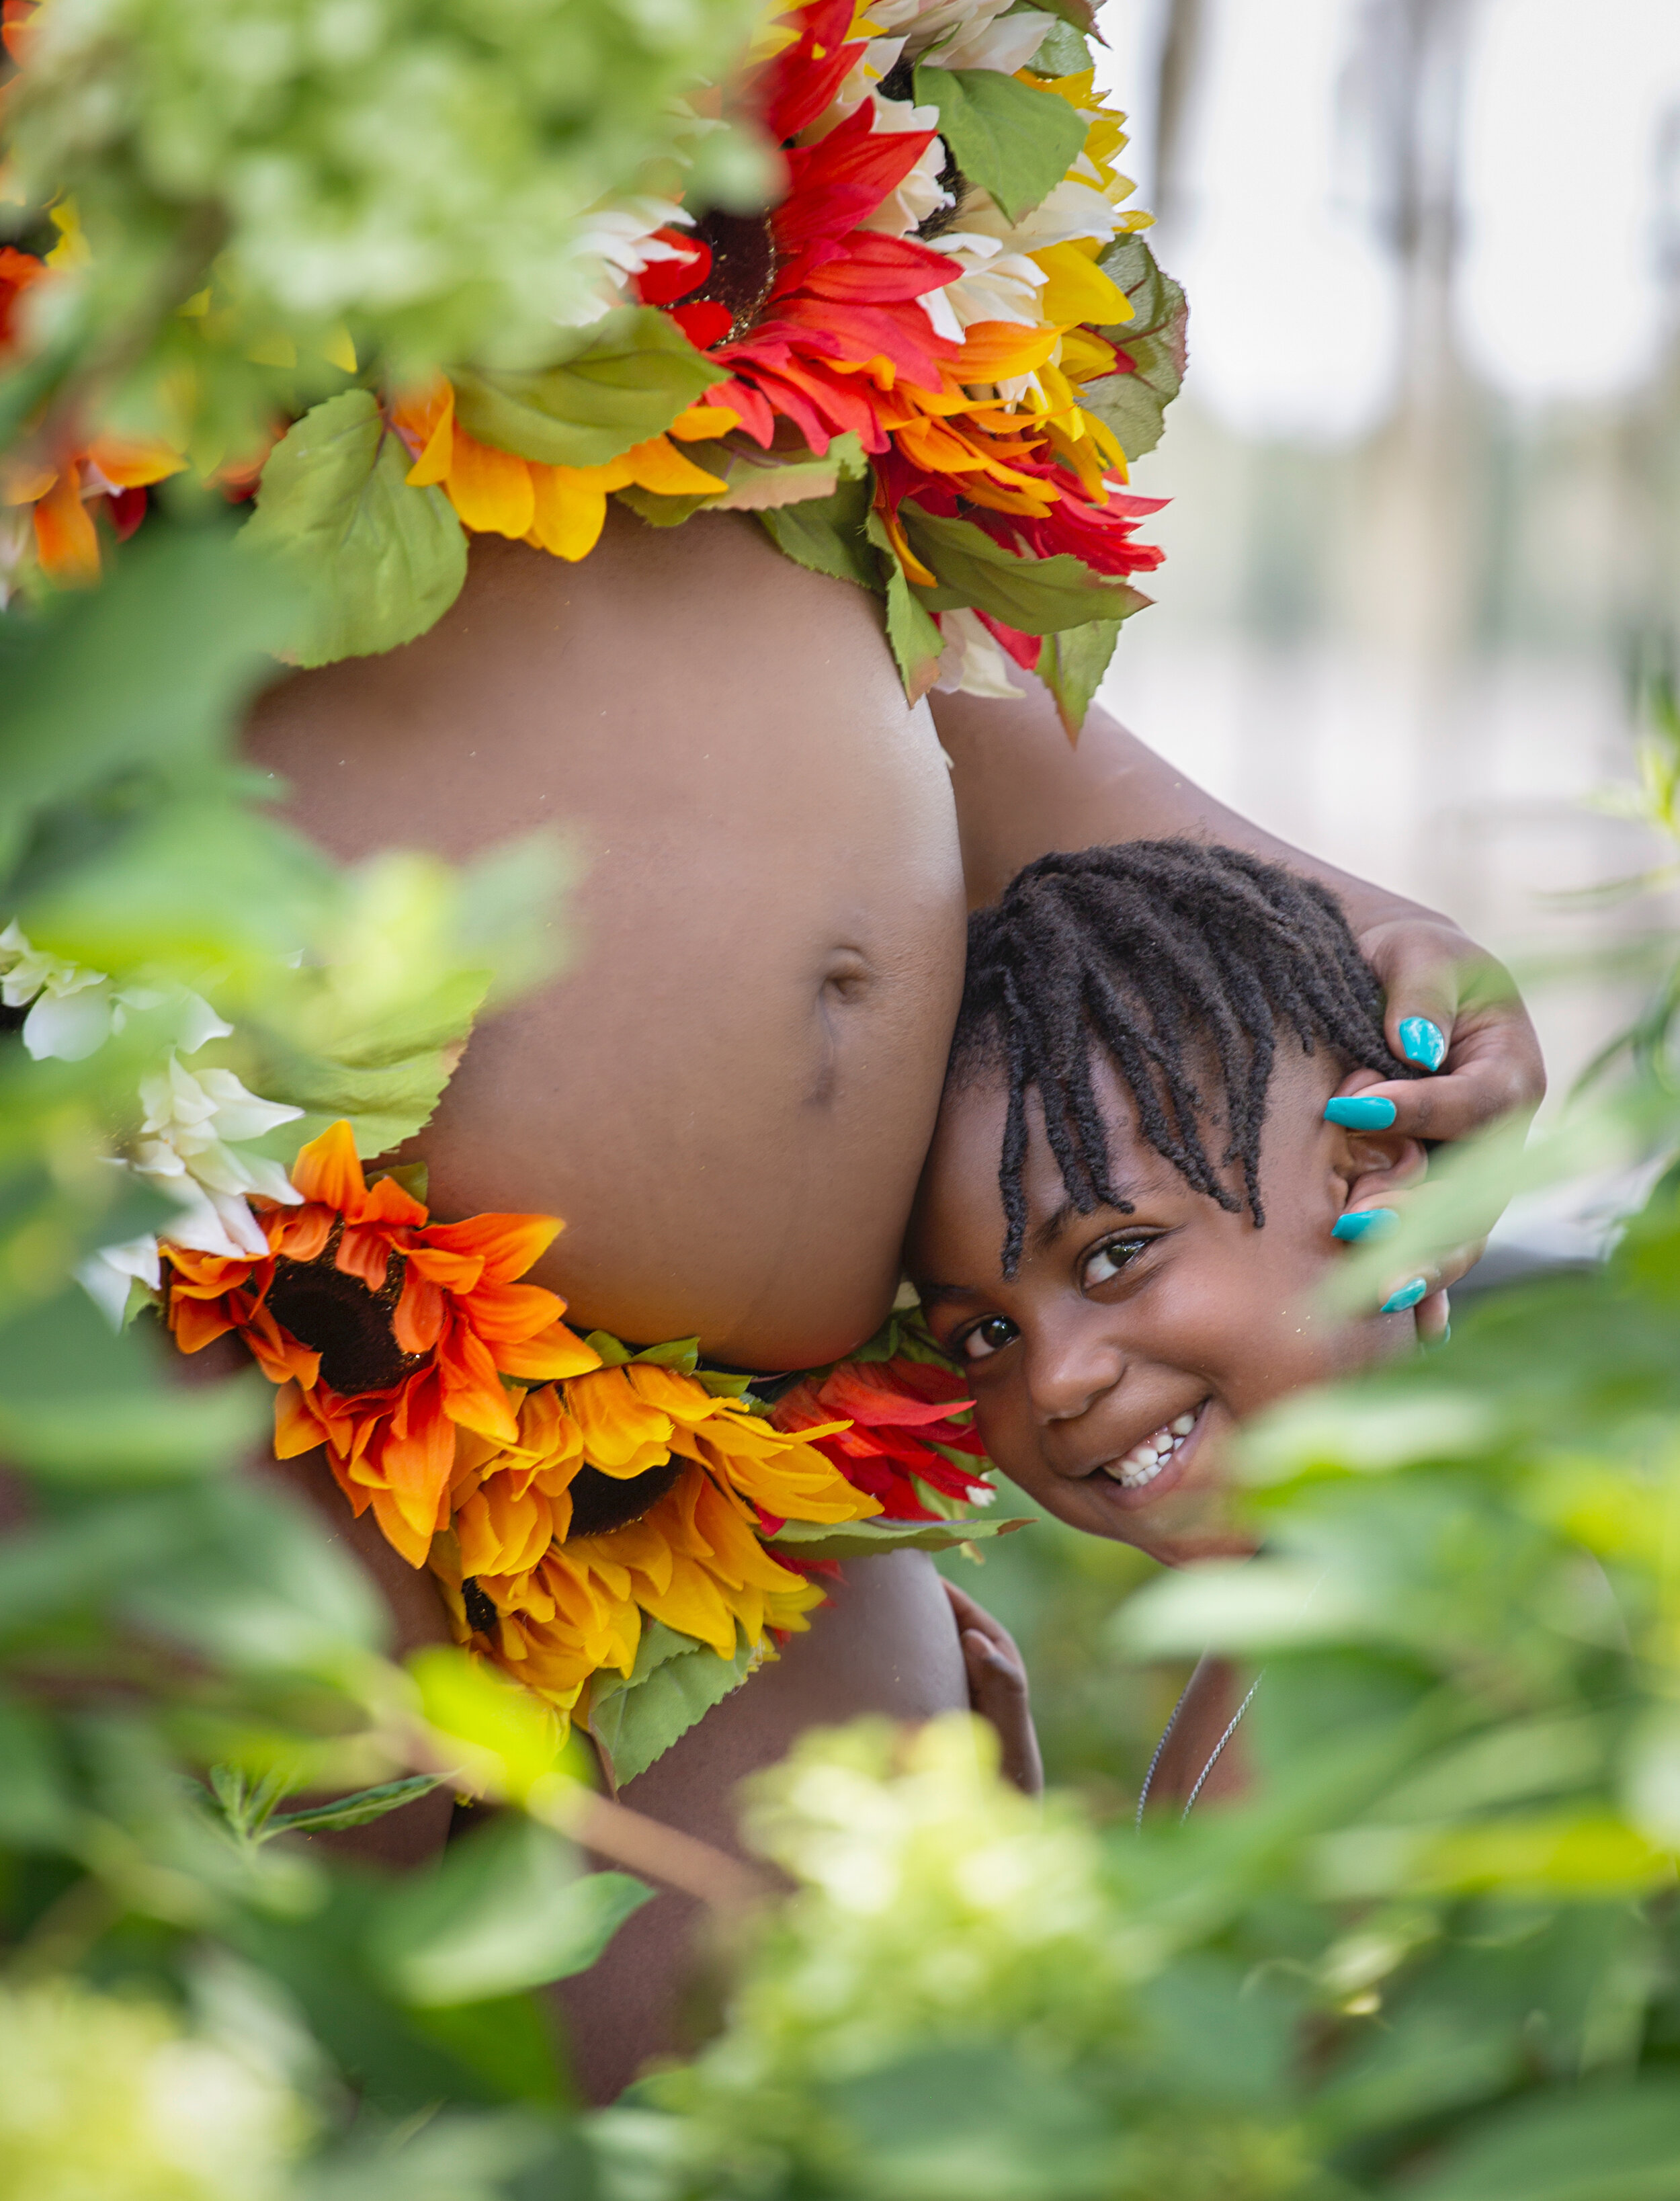 A joyful peek-a-boo moment with a soon-to-be big brother, his smile framed by vibrant sunflowers, at the New Orleans Botanical Garden